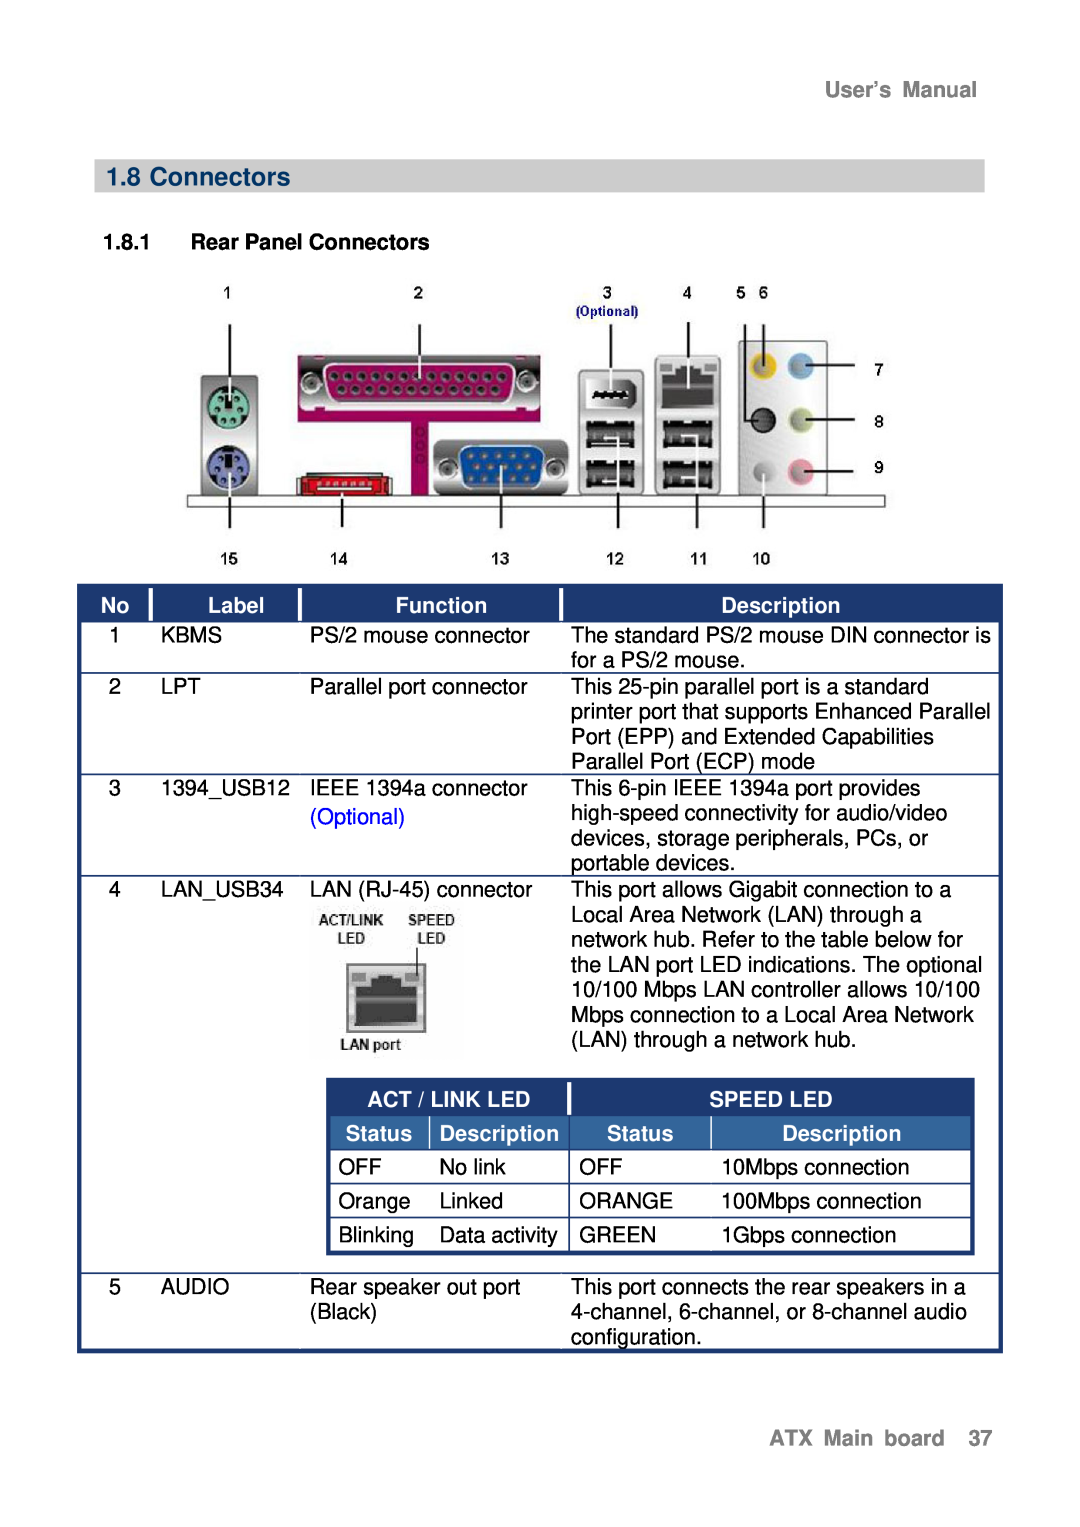 Intel AX965Q Rear Panel Connectors, Description, Act / Link Led, Speed Led, Status, User’s Manual, Label, Function 